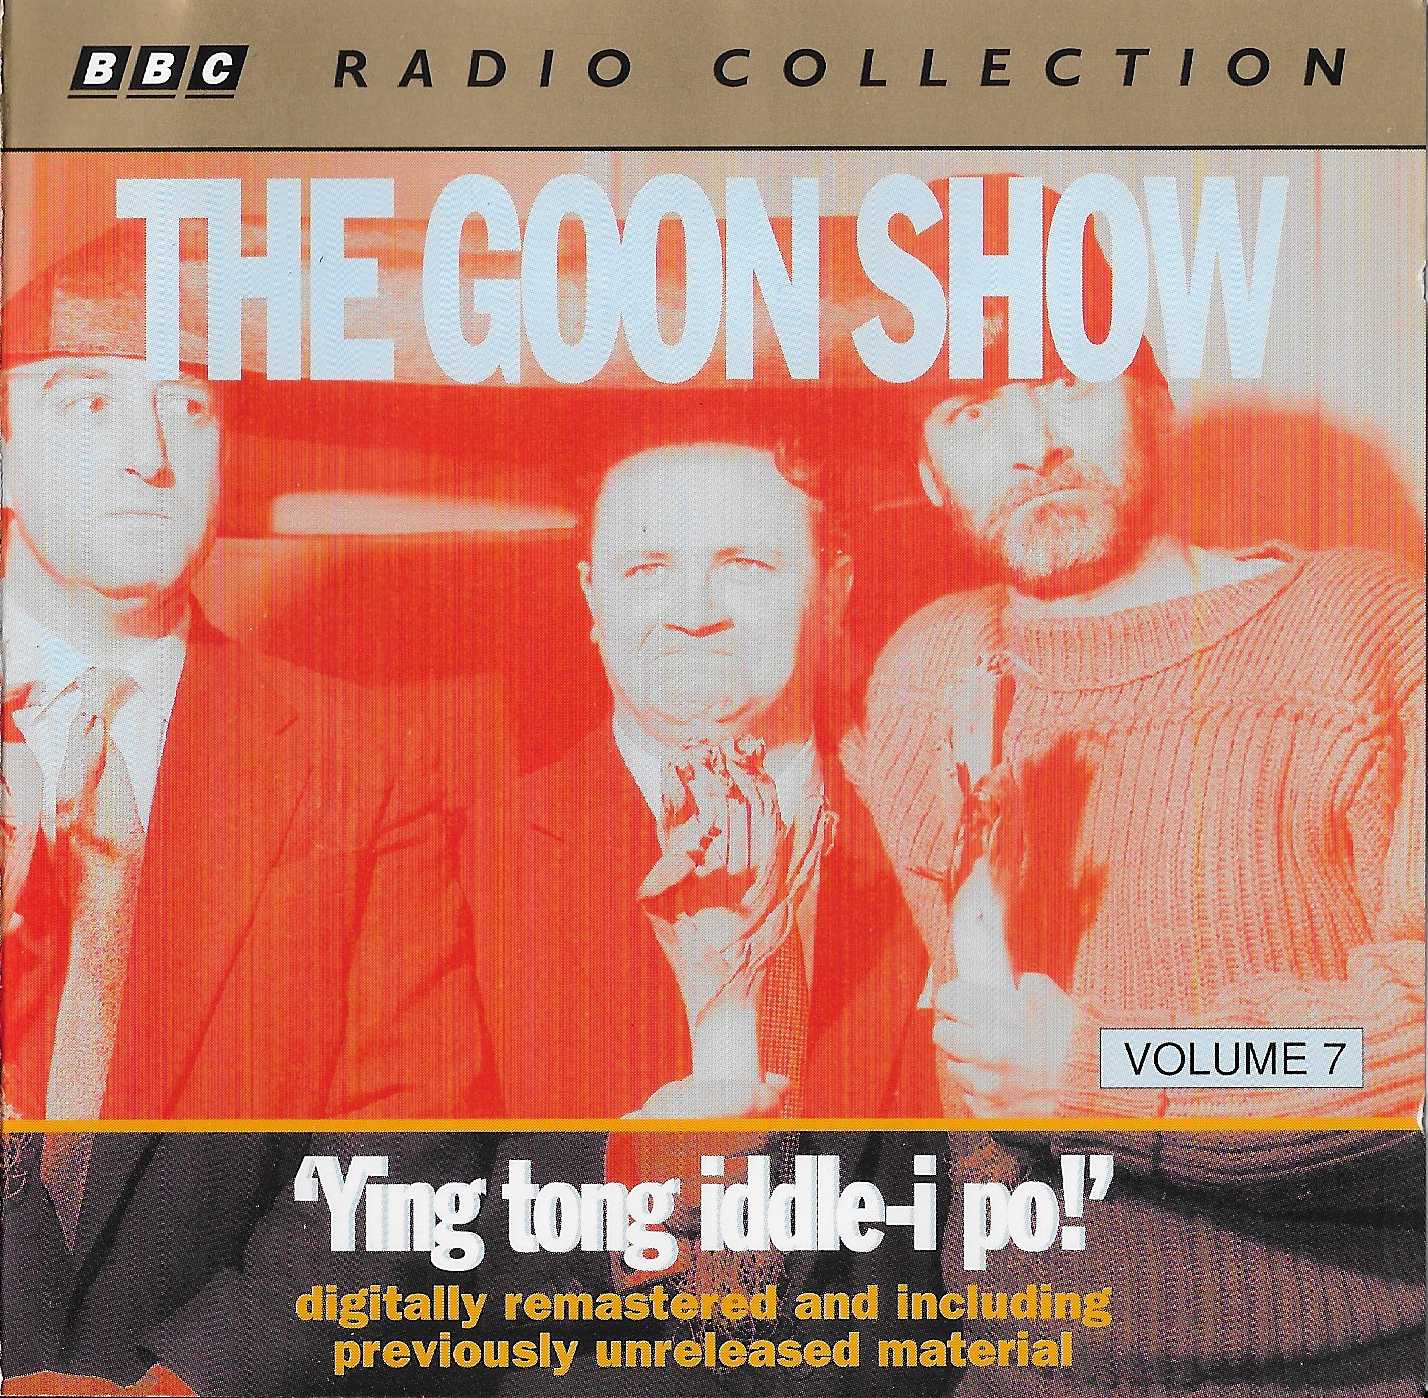 Picture of The Goon show 7 - Ying tong iddle-i po! by artist Spike Milligan from the BBC cds - Records and Tapes library